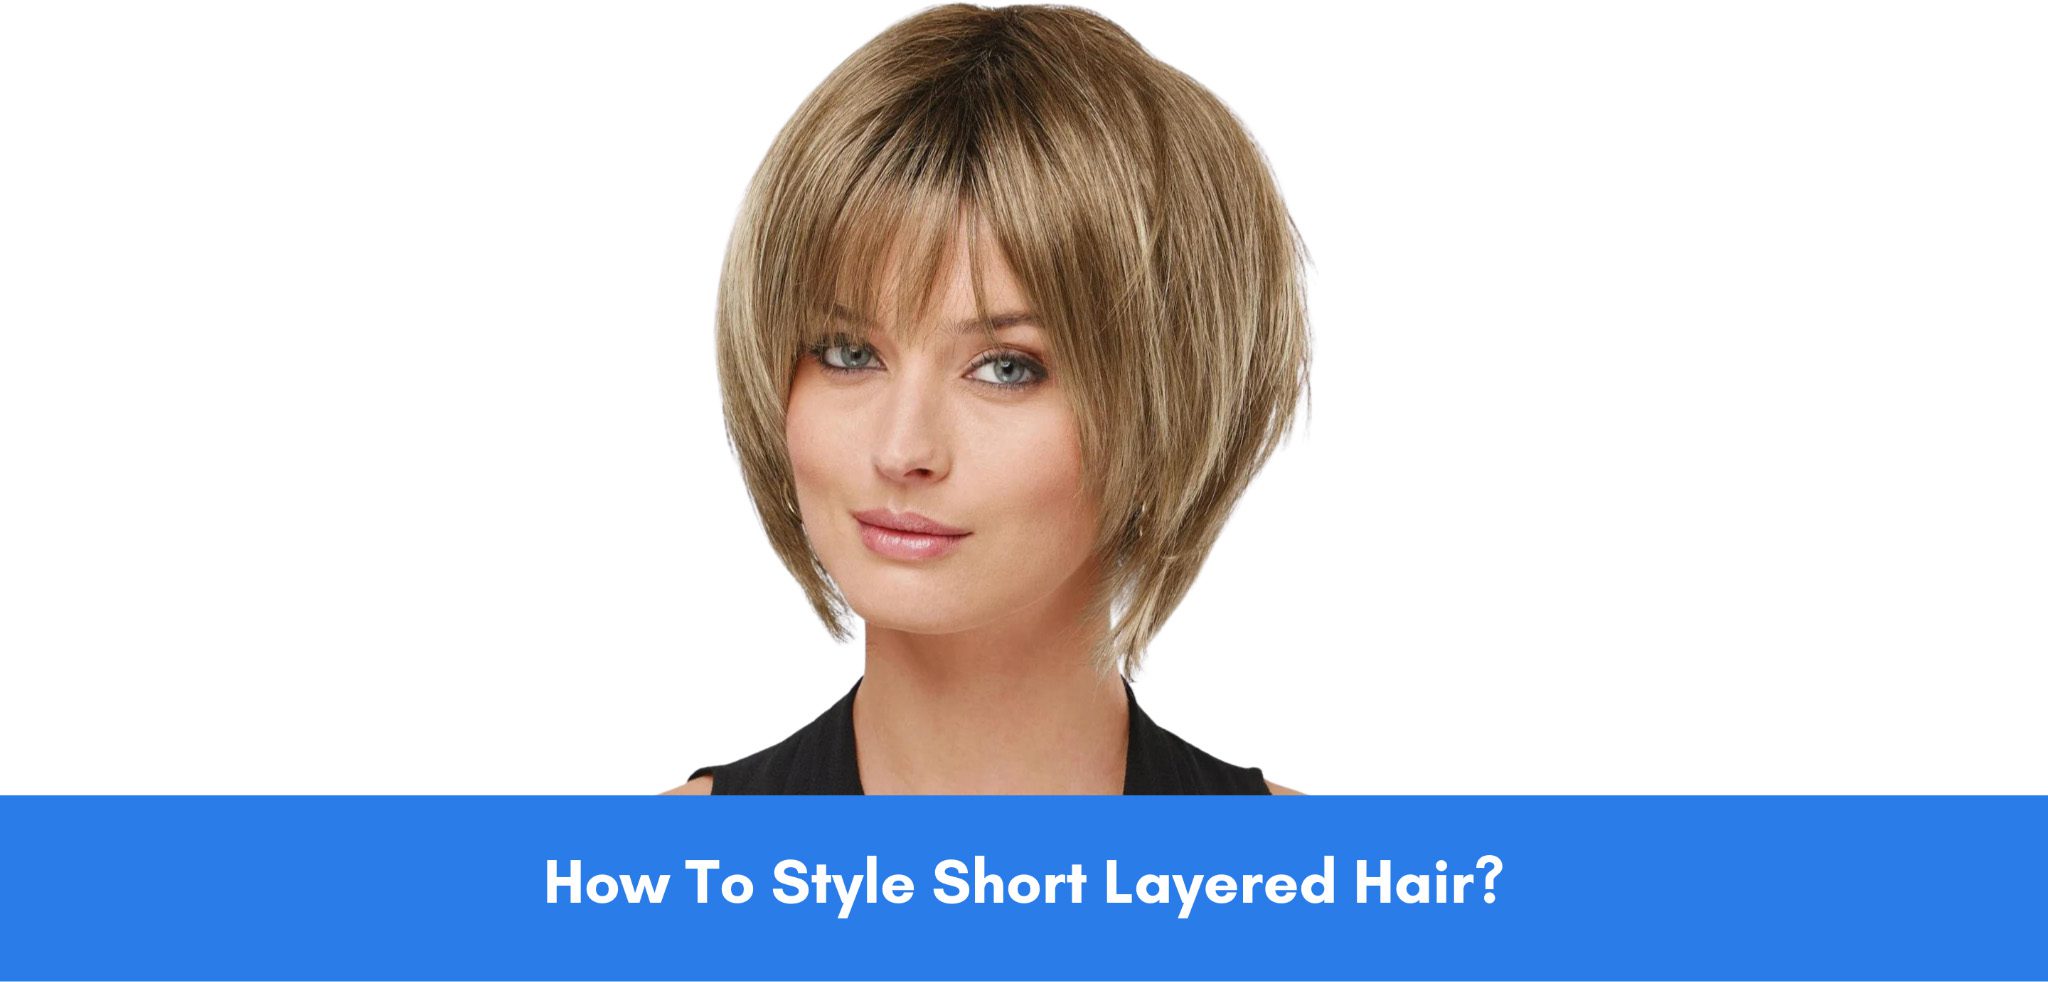 How To Style Short Layered Hair?